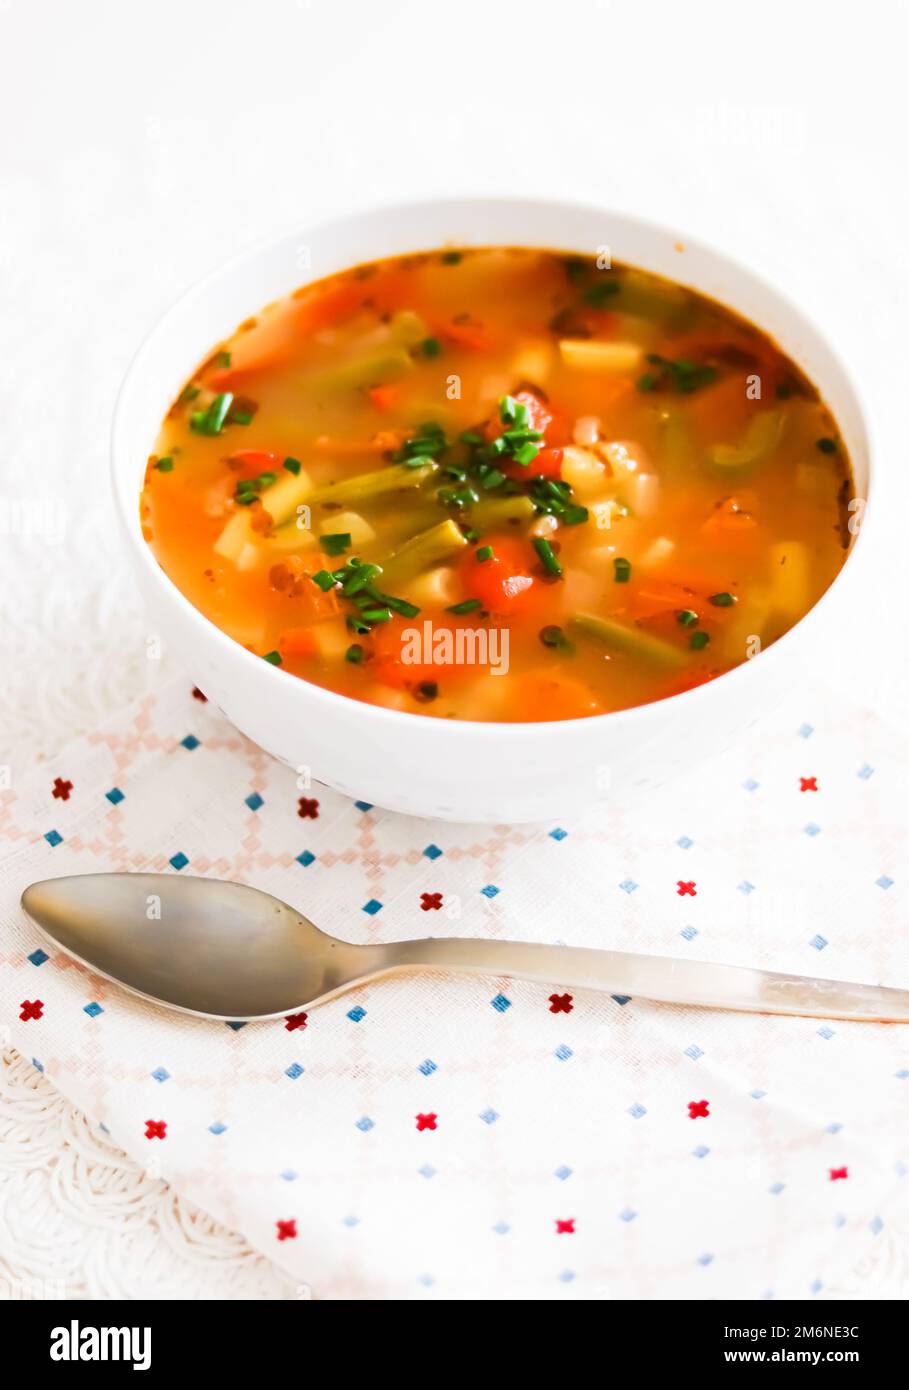 Hot vegetable soup in bowl, comfort food and homemade meal Stock Photo